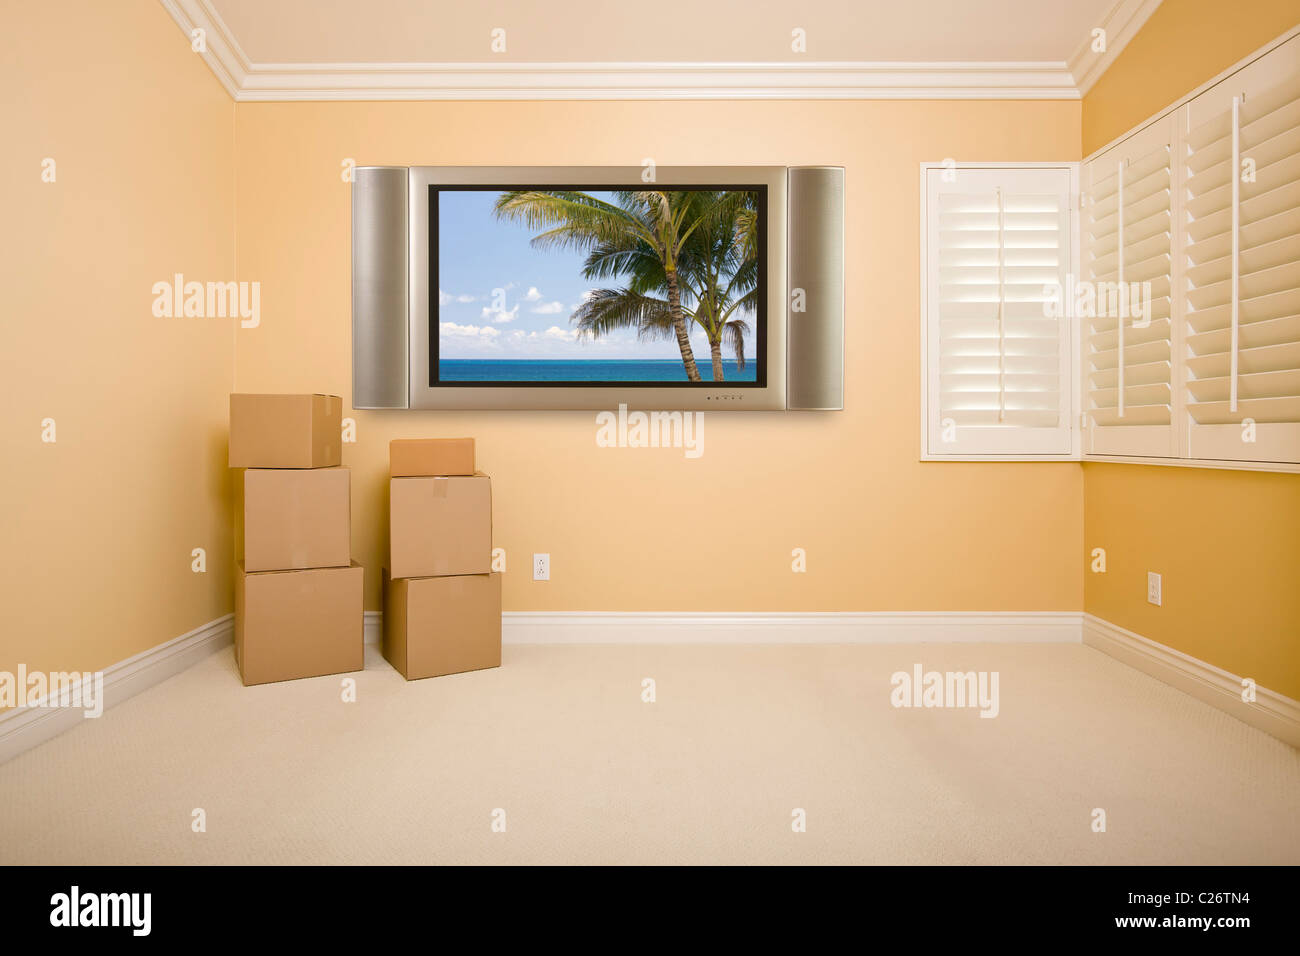 Flat Panel Television on Wall with Tropical Scene in Empty Room with Boxes. Stock Photo